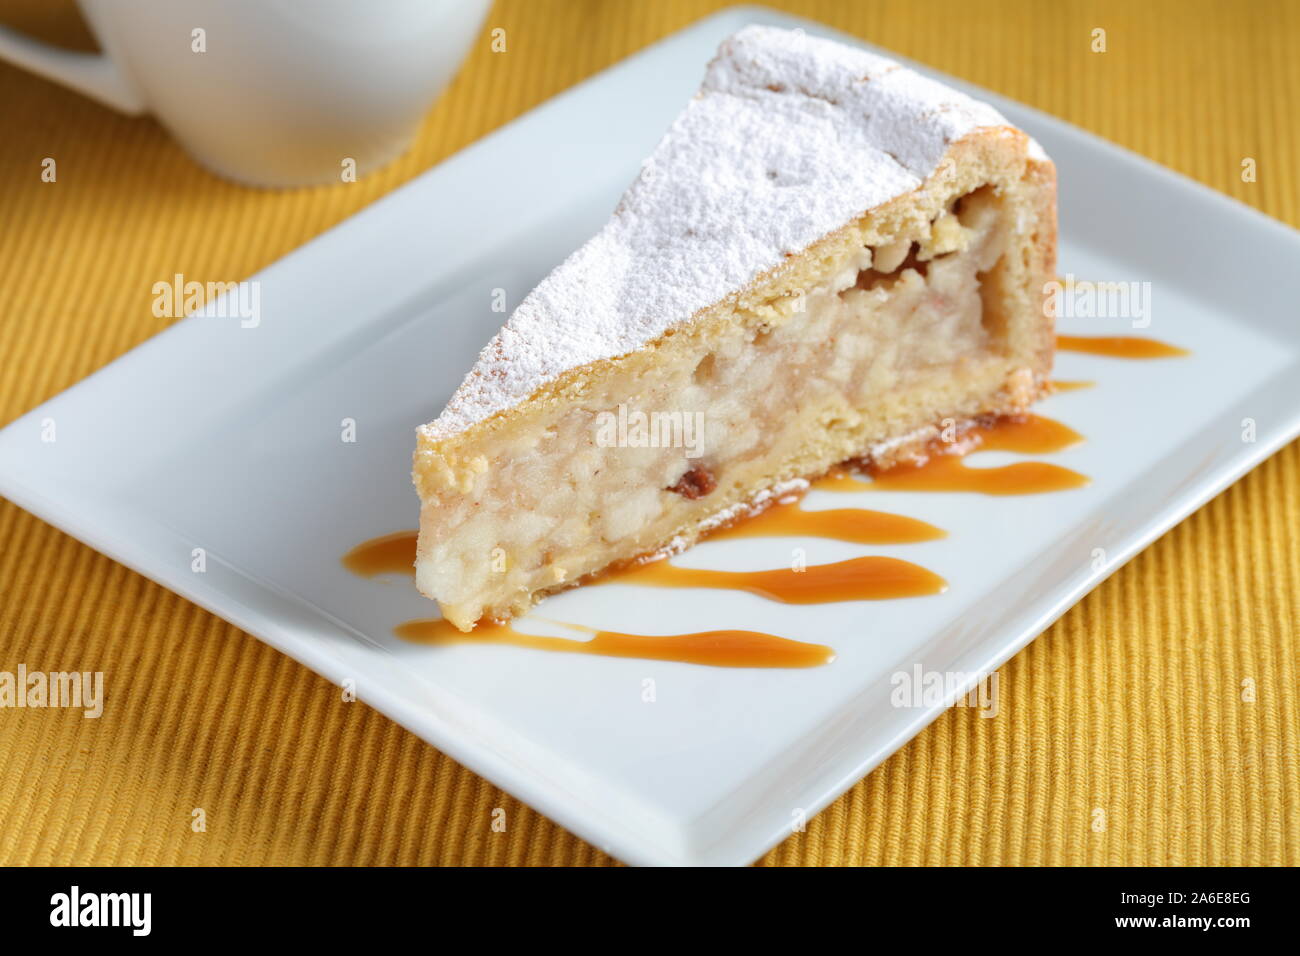 Slice of apple strudel topped with powdered sugar on a plate decorated with caramel sauce Stock Photo